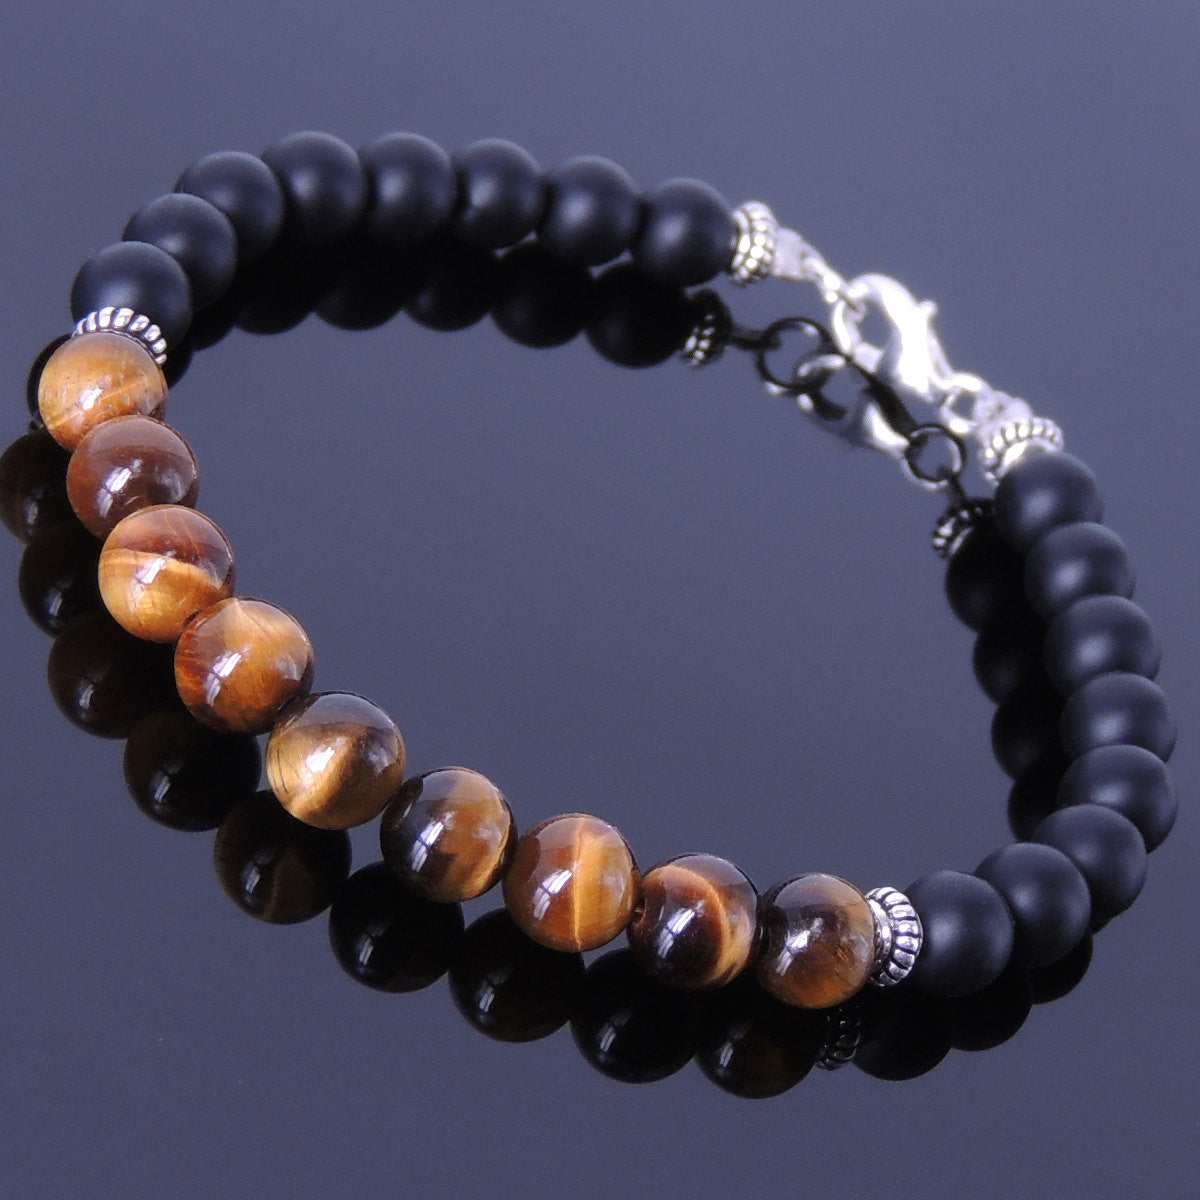 6mm Brown Tiger Eye & Matte Black Onyx Healing Gemstone Bracelet with S925 Sterling Silver Spacer Beads & Clasp - Handmade by Gem & Silver BR154